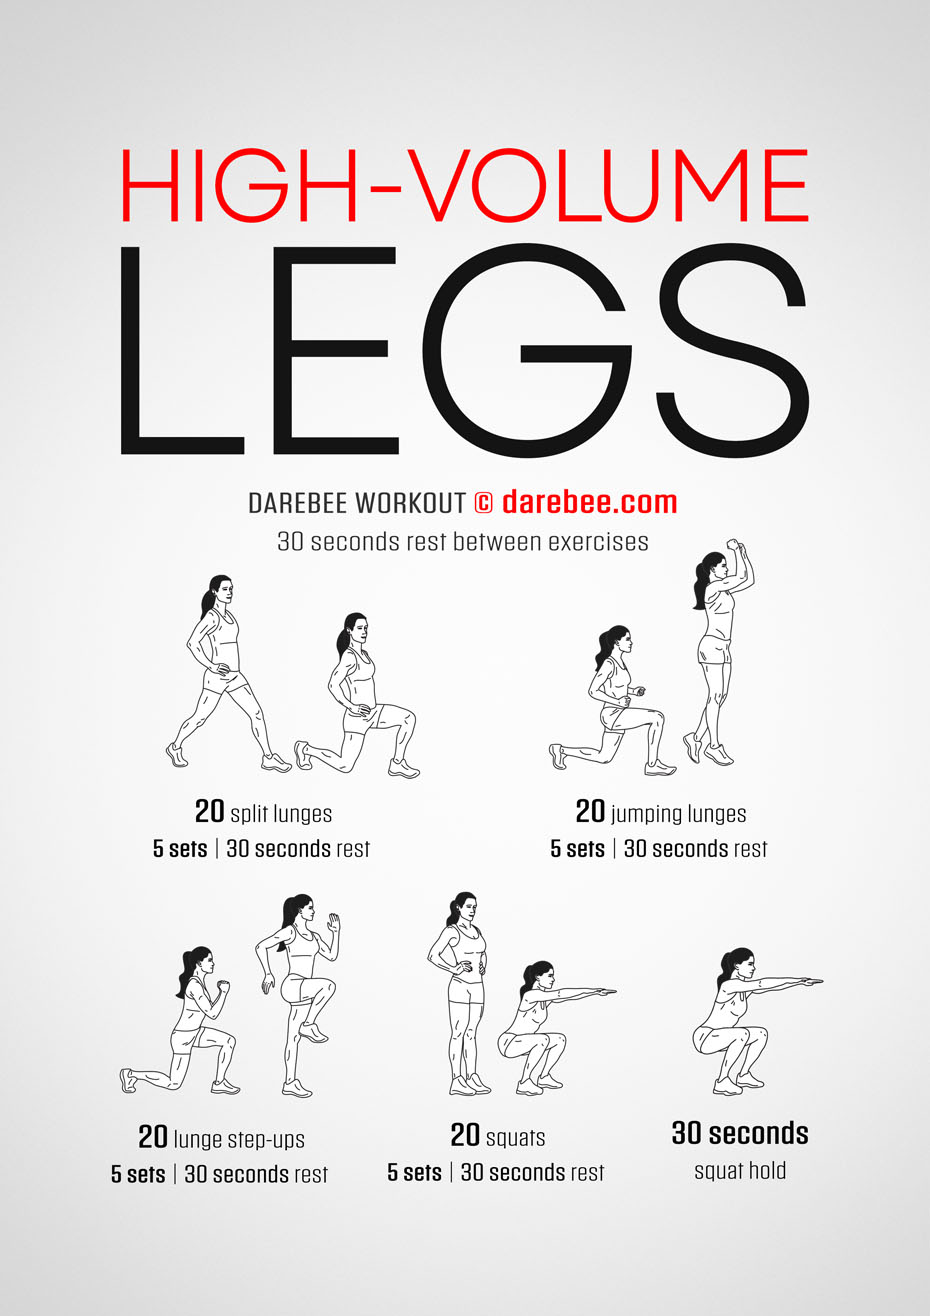 High-Volume Legs workout is a Darebee home fitness workout that helps you develop strong legs.